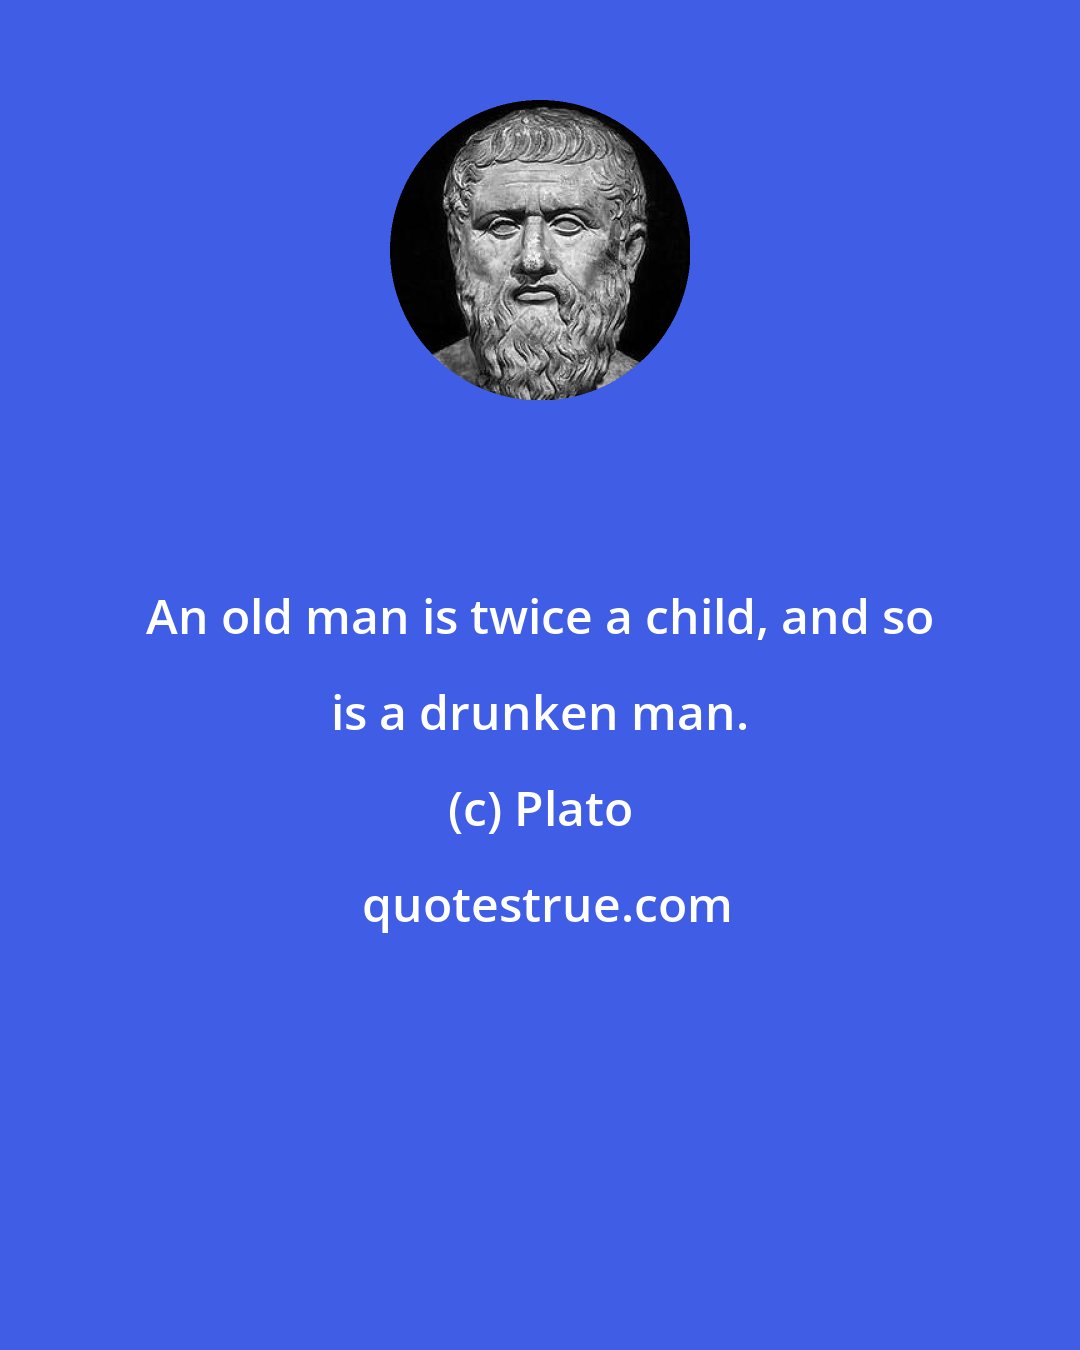 Plato: An old man is twice a child, and so is a drunken man.